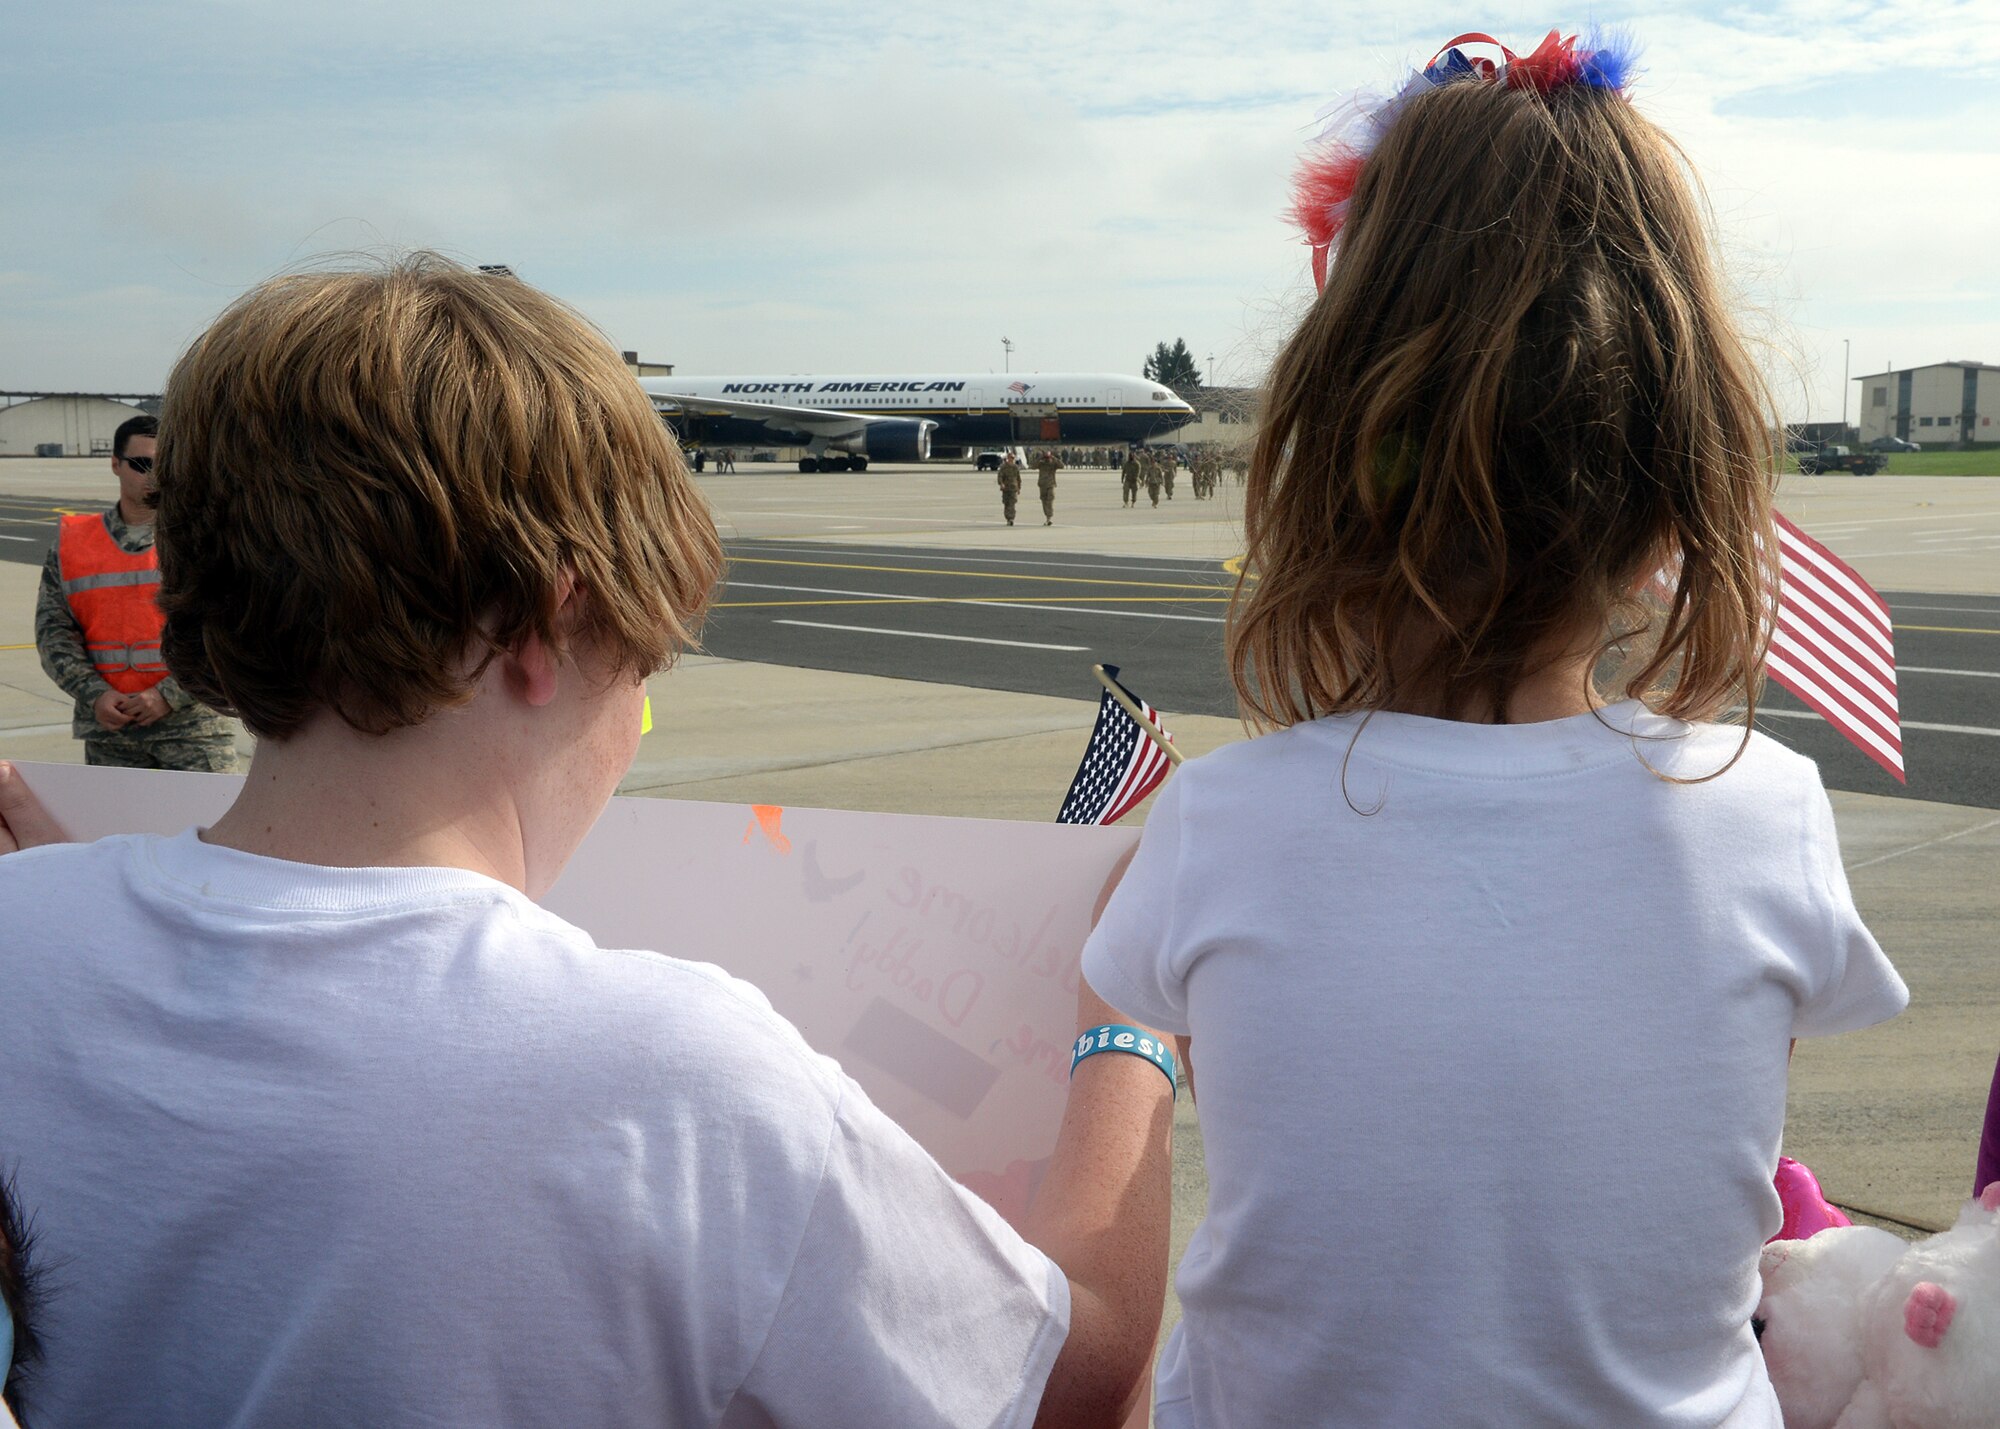 SPANGDAHLEM AIR BASE, Germany -- Conner Green and Brooklyn Scholl, children of Christy Scholl and U.S. Air Force Senior Master Sgt. Todd Scholl, watch as members of the 480th Fighter Squadron support community offload an aircraft here Sept. 21, 2013. The fighter squadron's support community comprises Airmen from many sections throughout the base: 480th Aircraft Maintenance Unit, 52nd Component Maintenance Squadron, 52nd Equipment Maintenance Squadron, 52nd Logistics Readiness Squadron. (U.S. Air Force photo by Staff Sgt. Daryl Knee/Released)